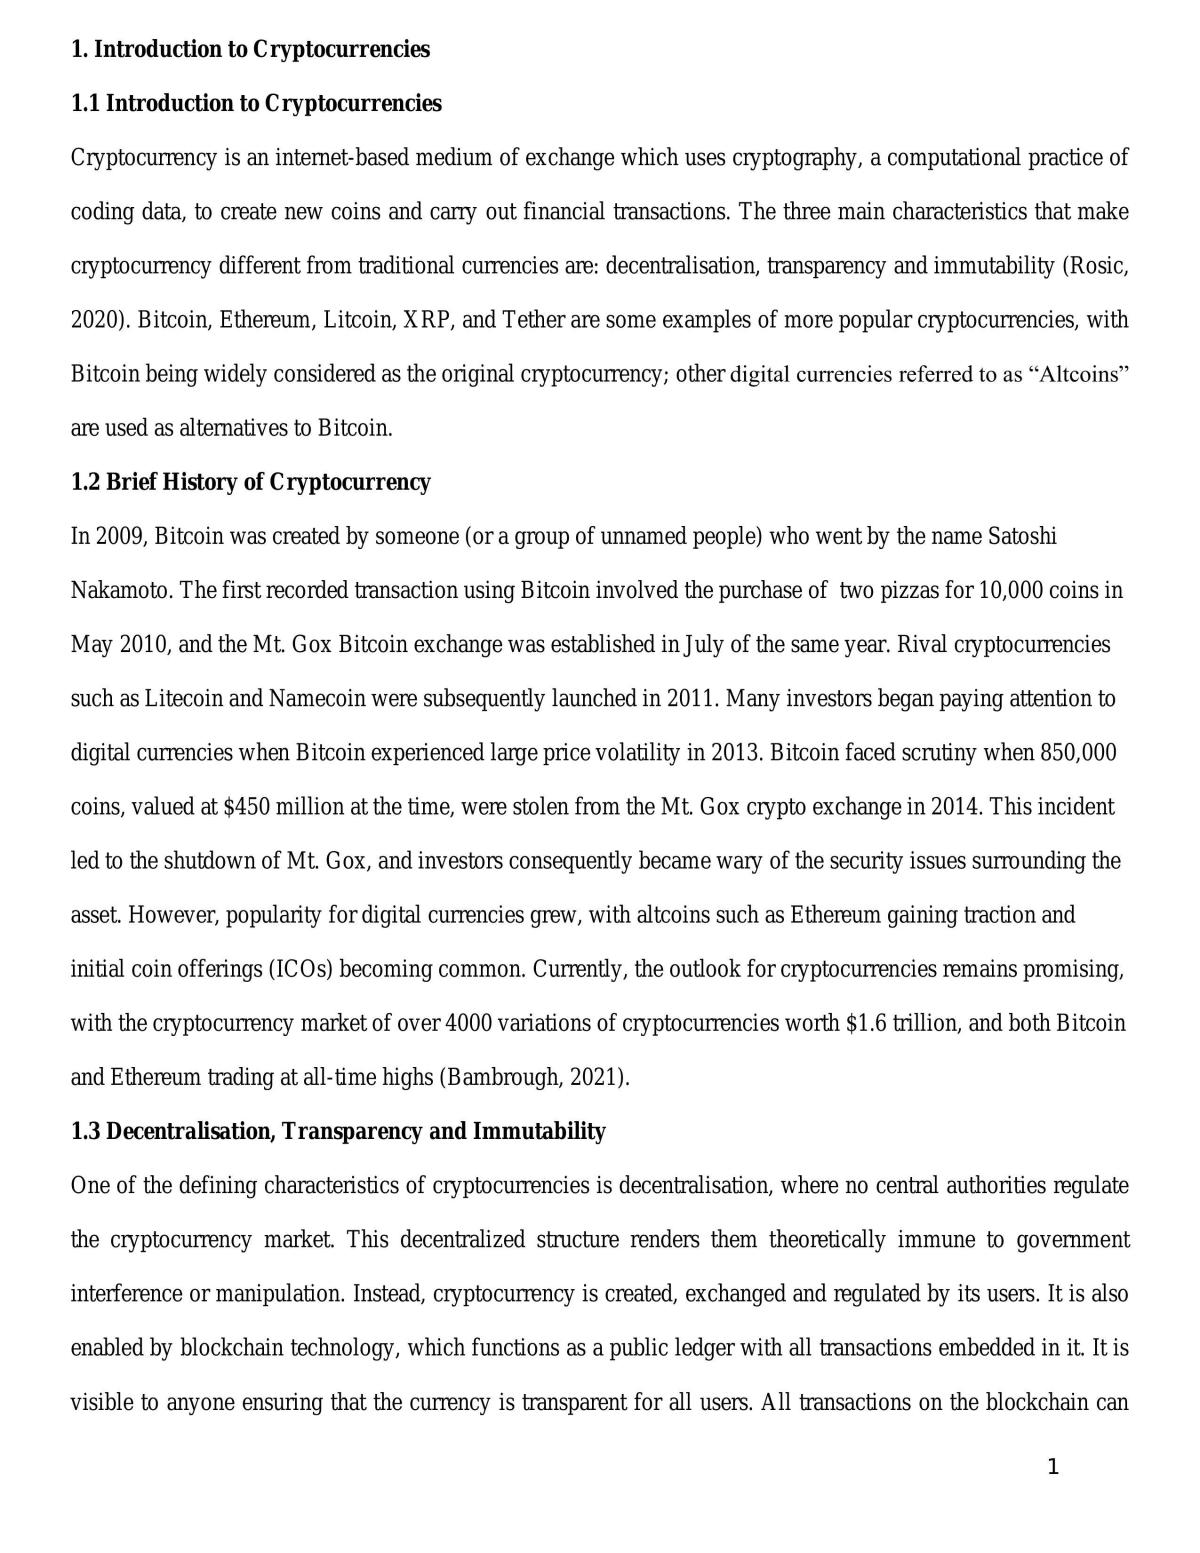 FIN3703 - Cryptocurrency Report - Page 2